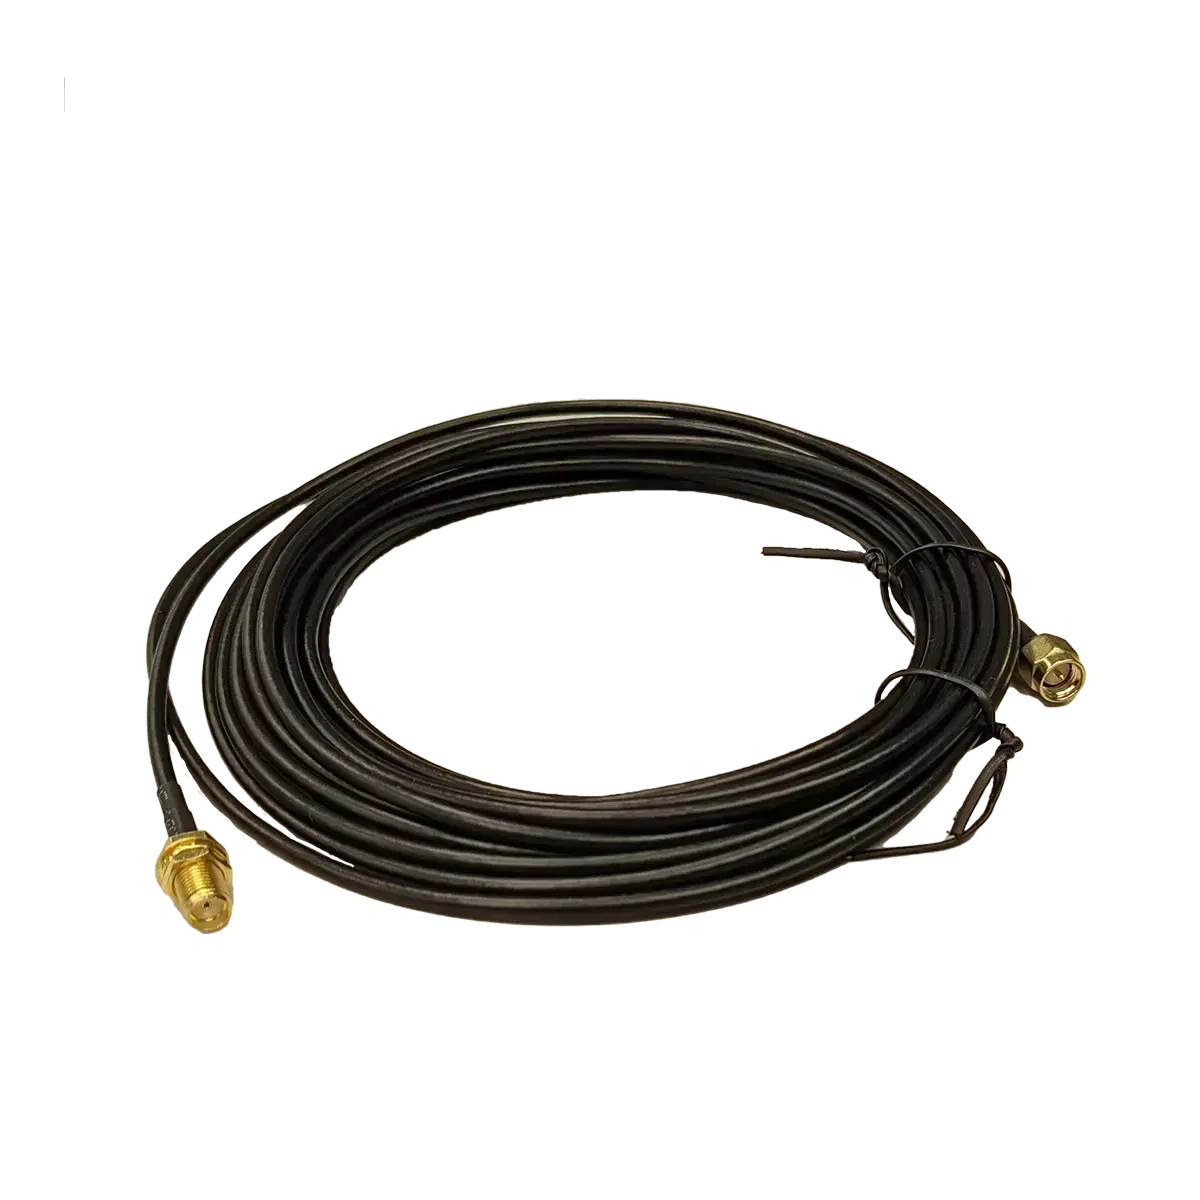 ReconEco 20 ft Antenna Extension Cable